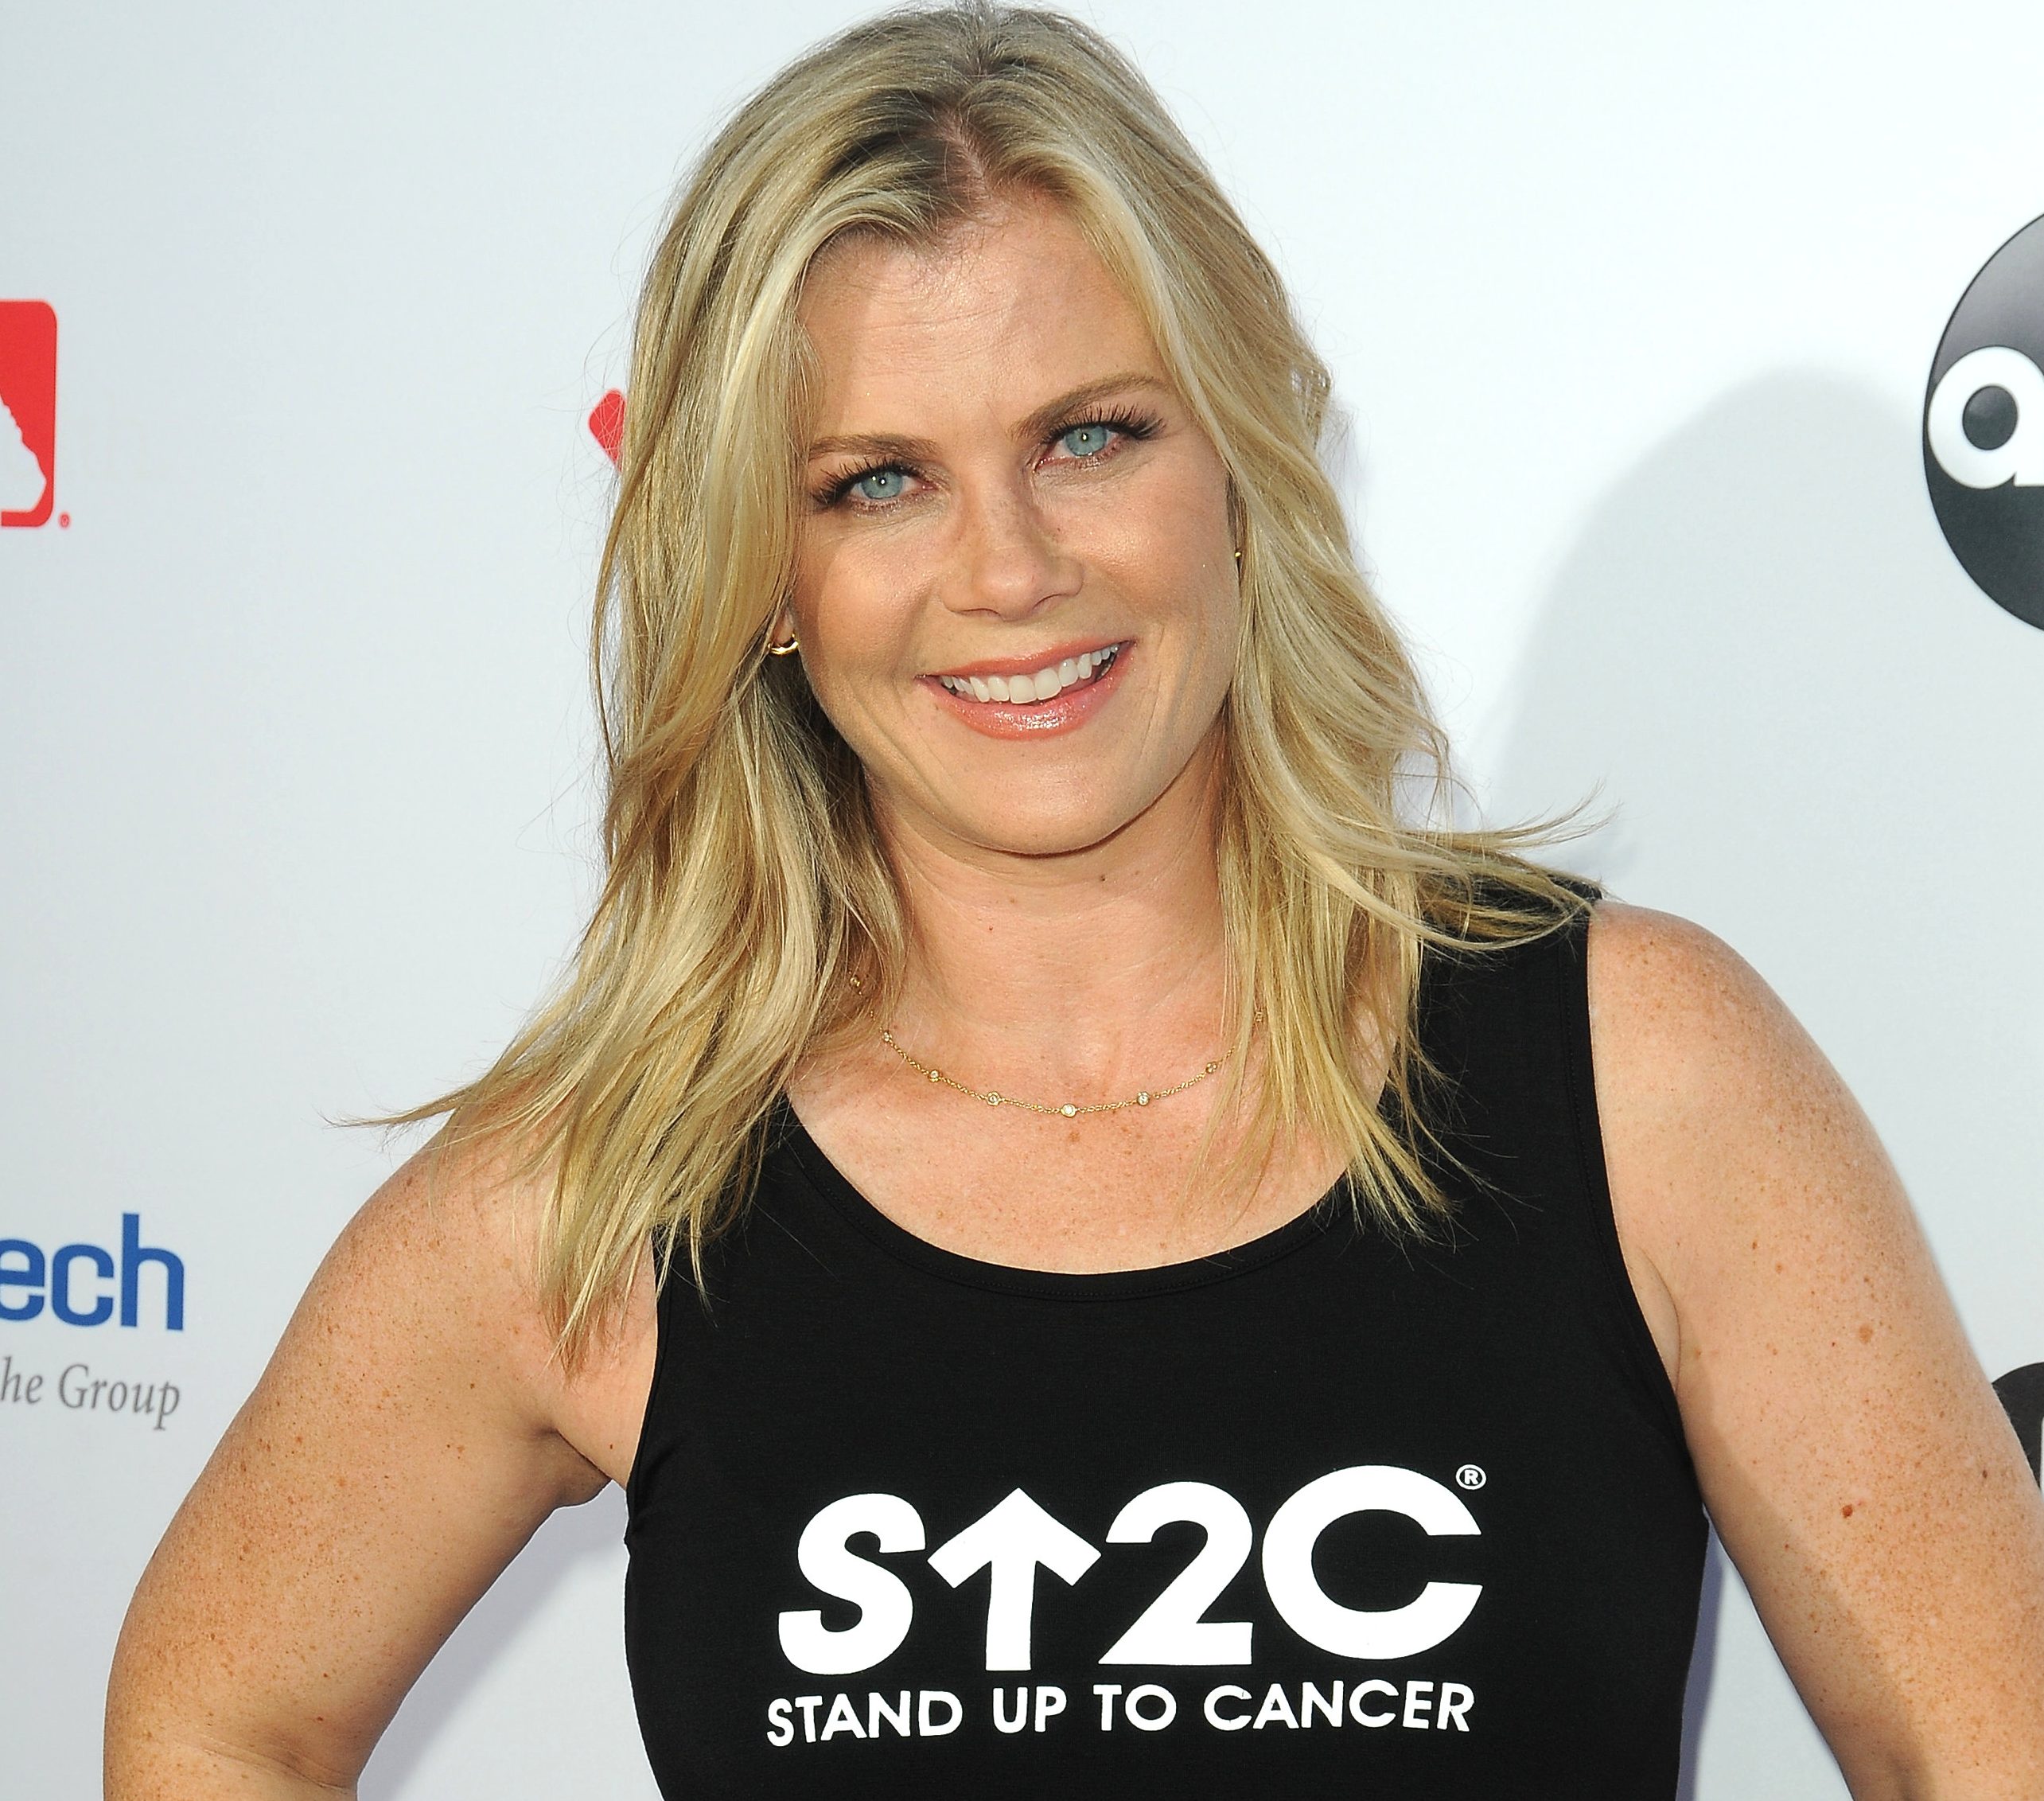 All About David Sanov Wife, Alison Sweeney